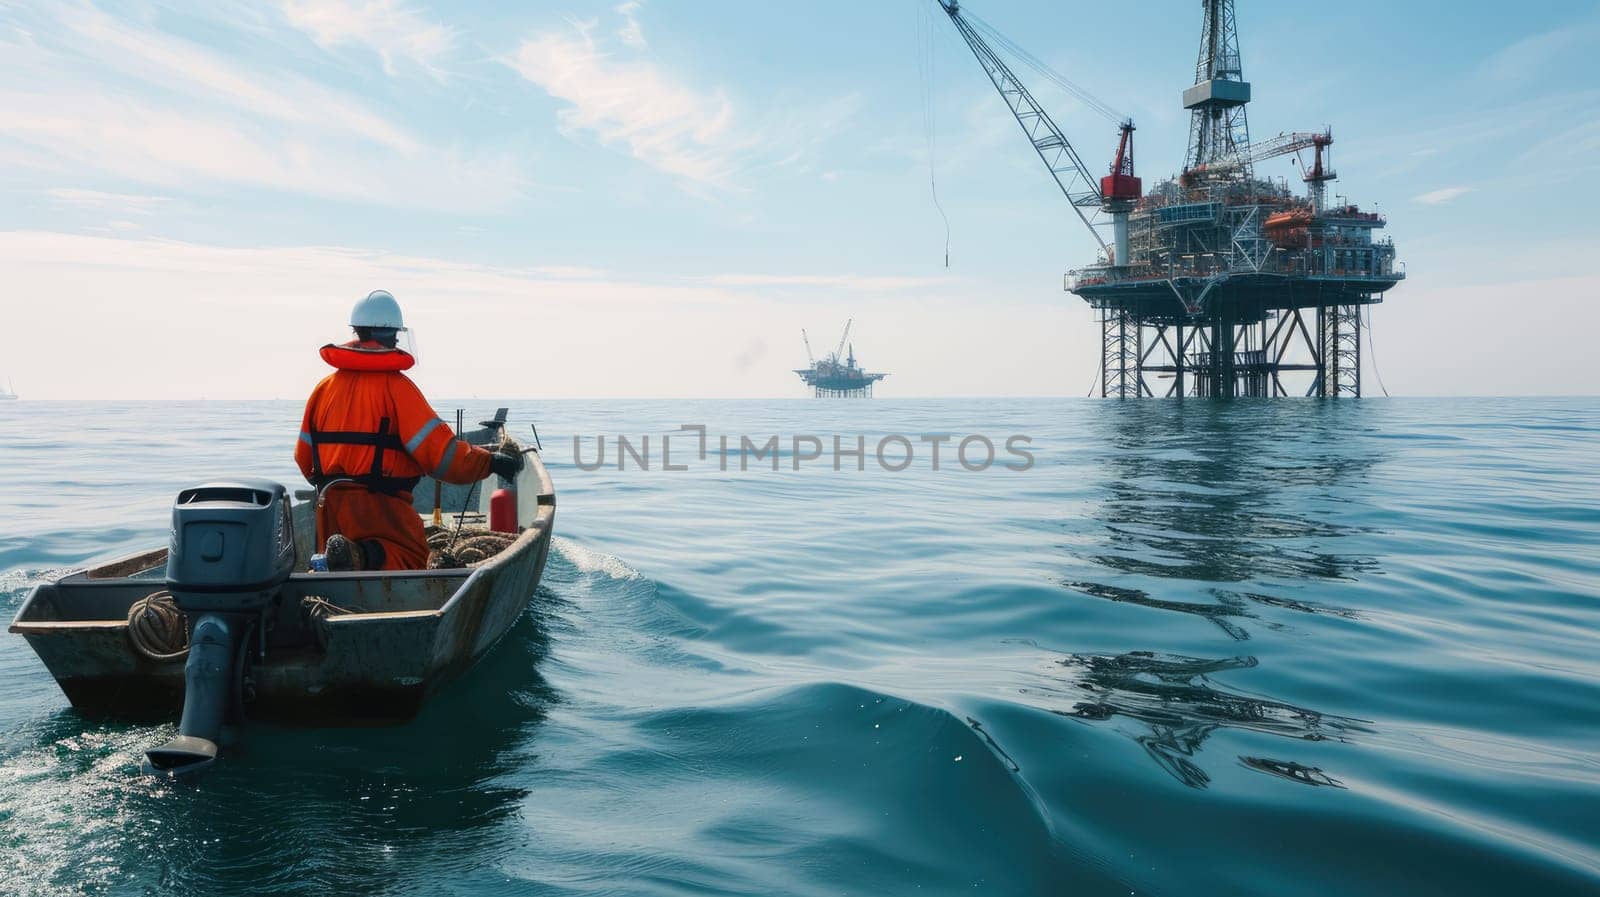 A person is on a watercraft near an offshore oil rig, surrounded by water and sky, while the wind blows and clouds float above. AIG41